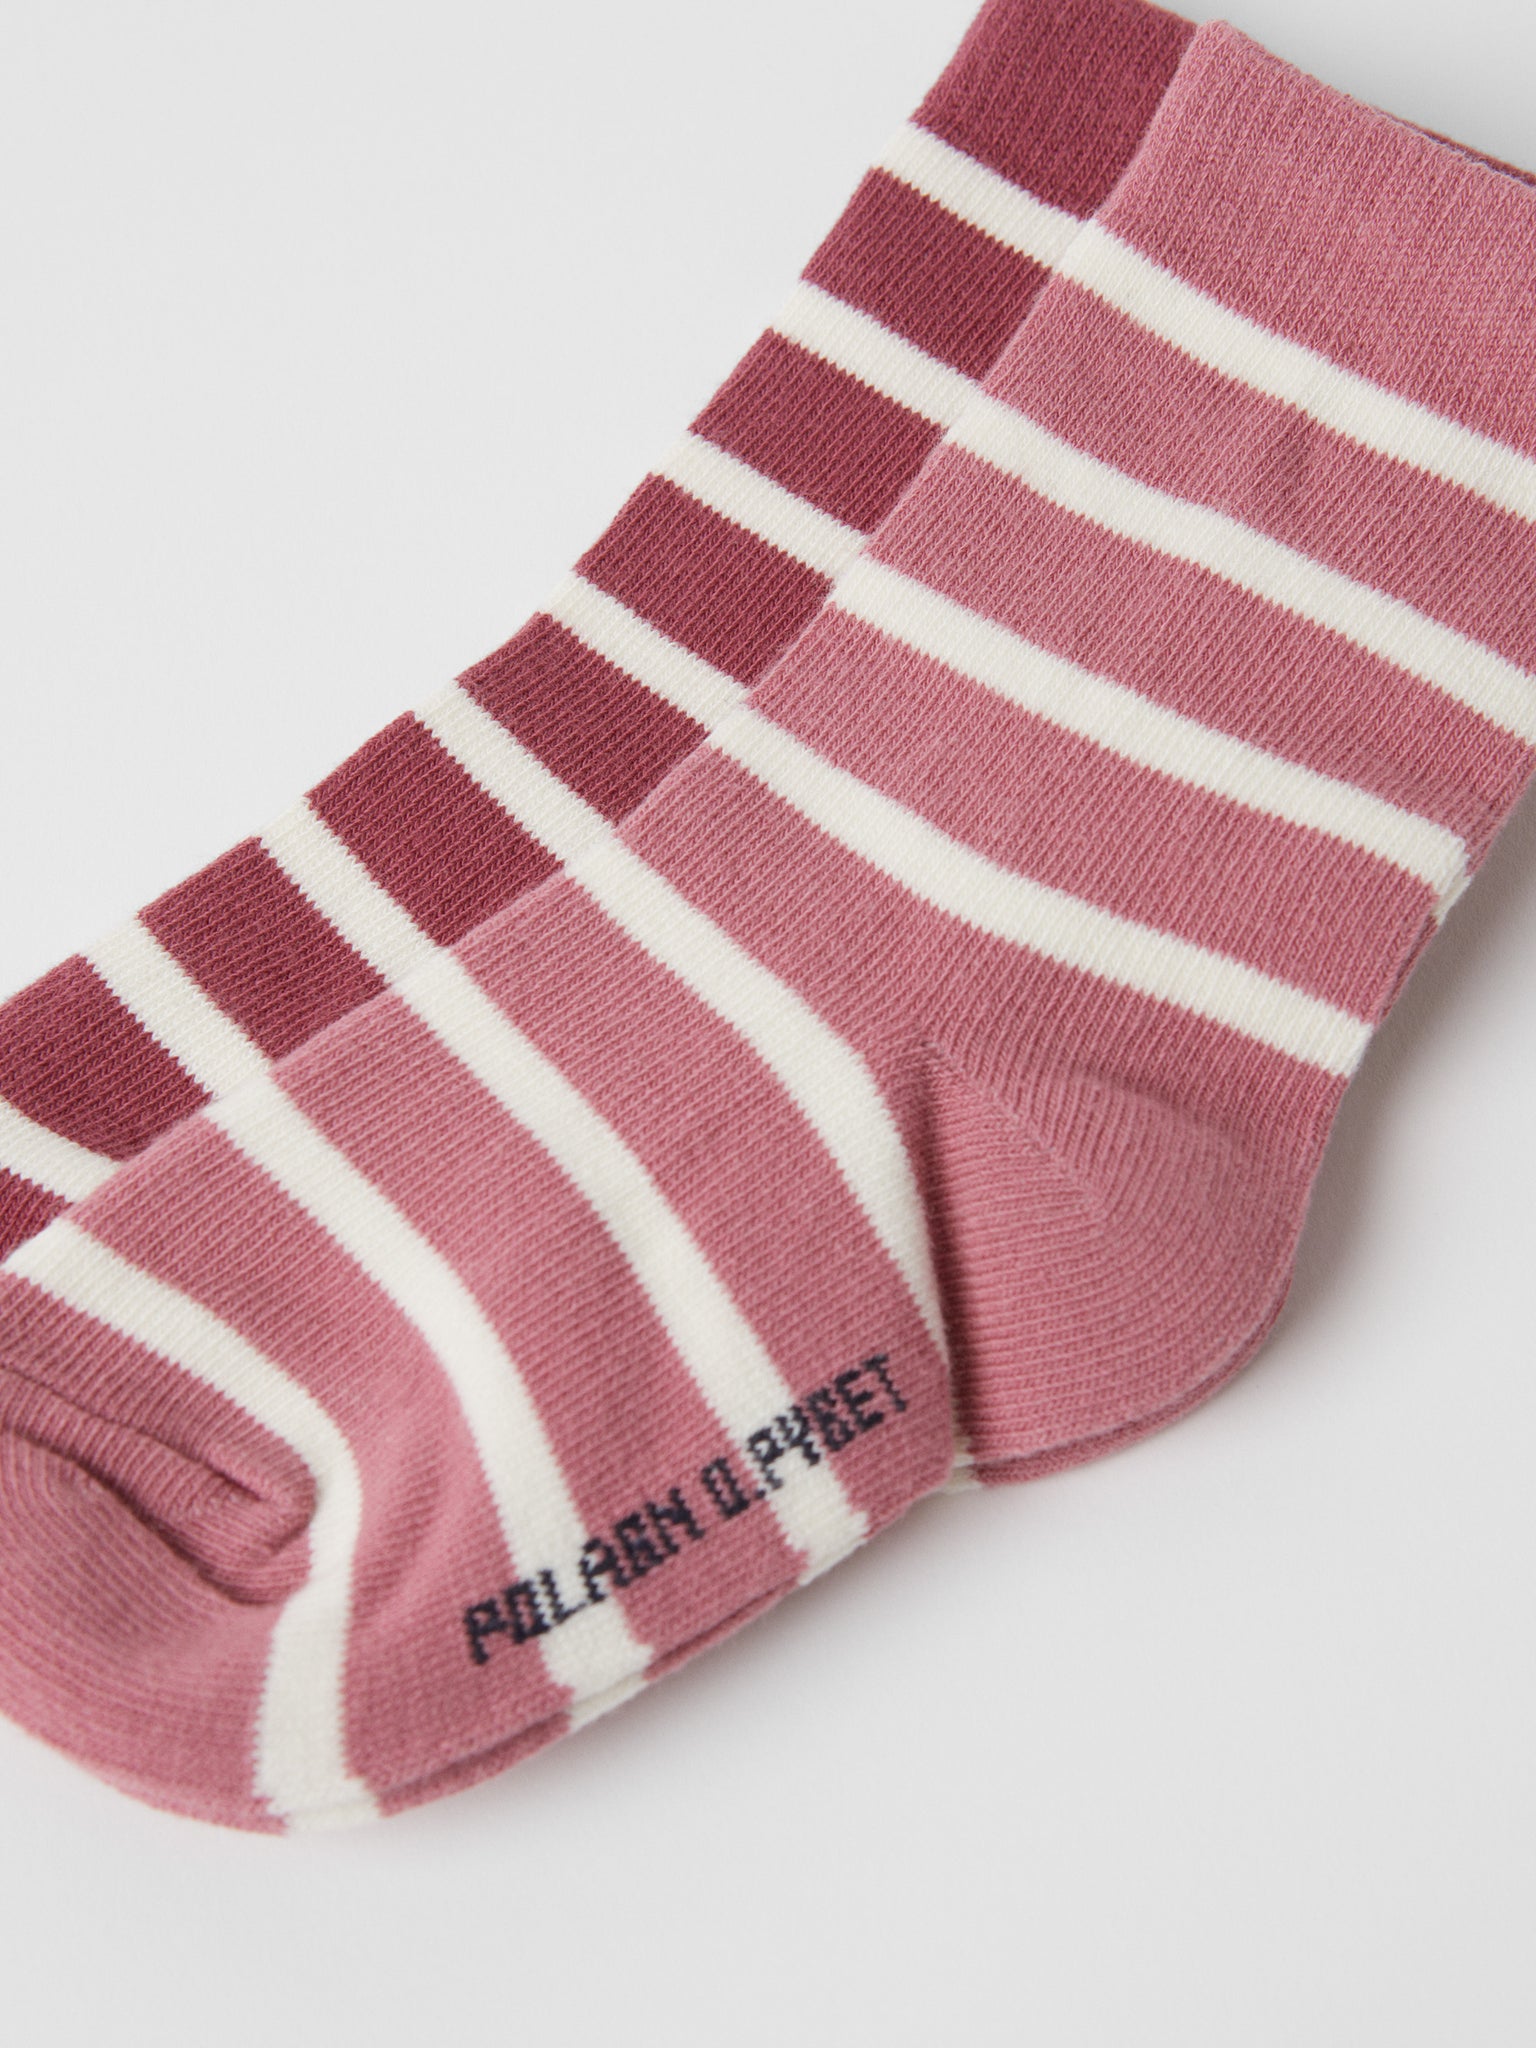 Striped Red Kids Socks Multipack from the Polarn O. Pyret kidswear collection. The best ethical kids clothes